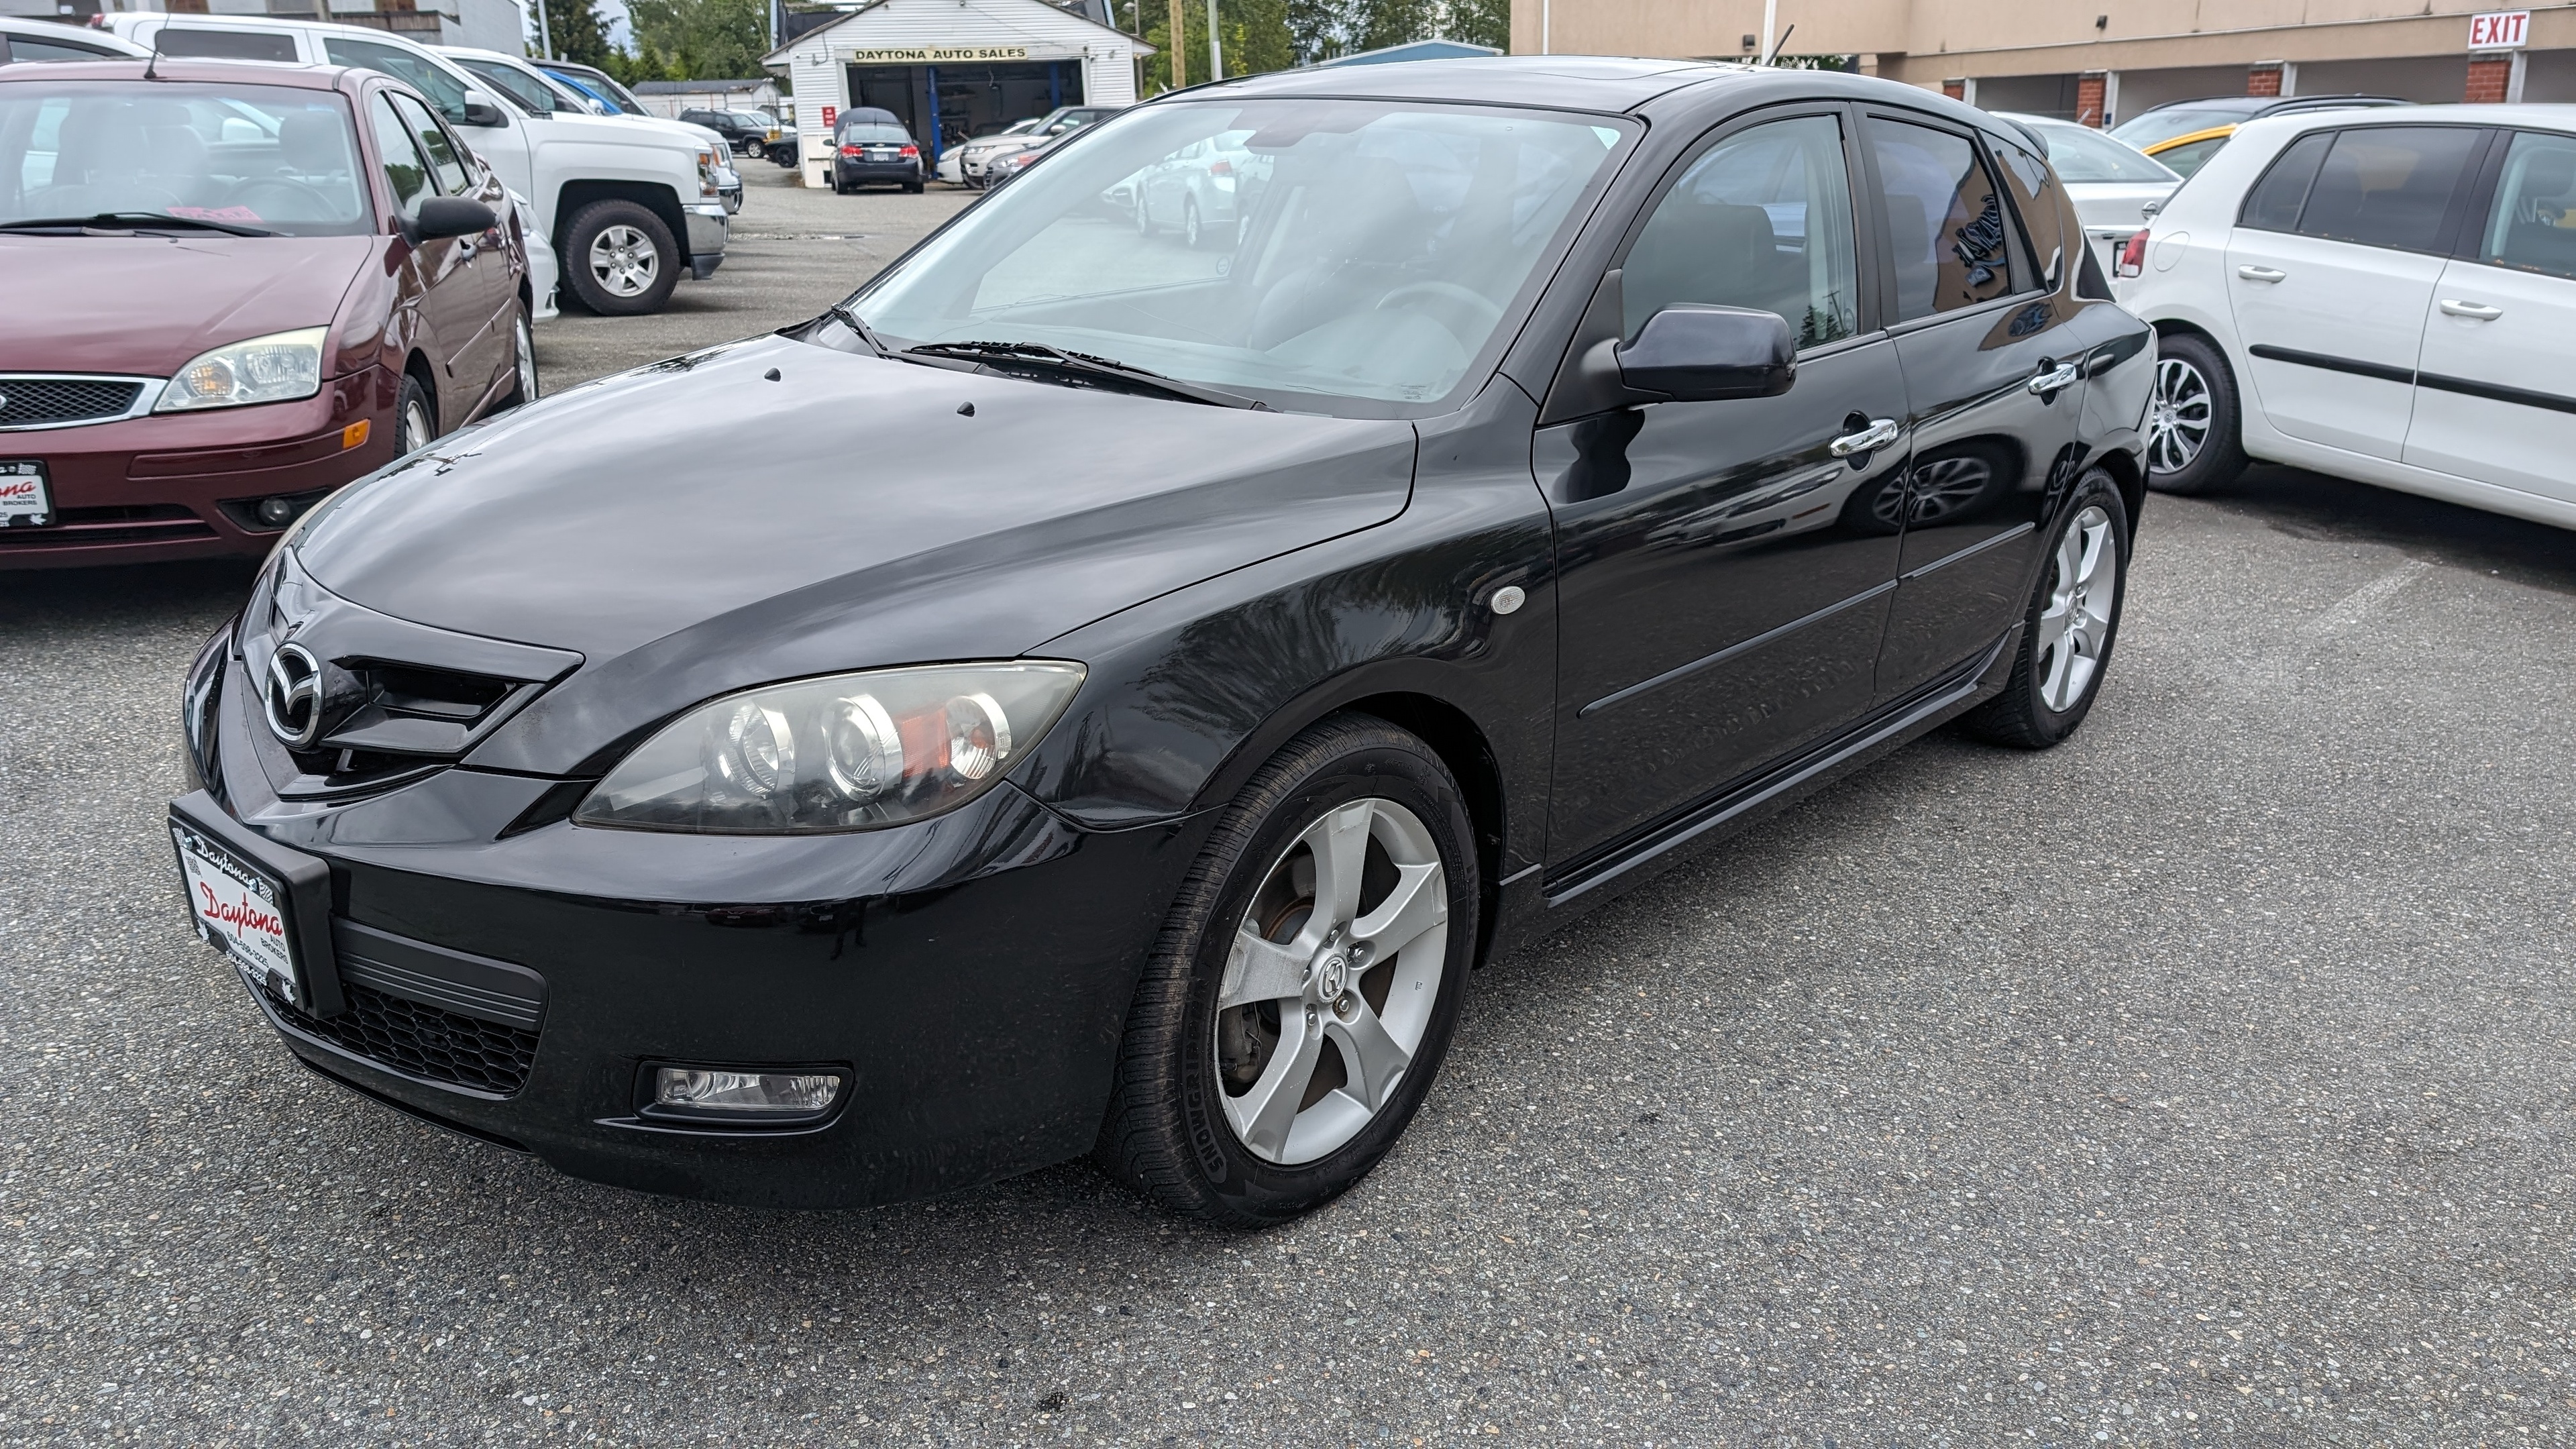 2009 Mazda Mazda3 4dr HB Sport Auto GT, leather sunroof, only 150000